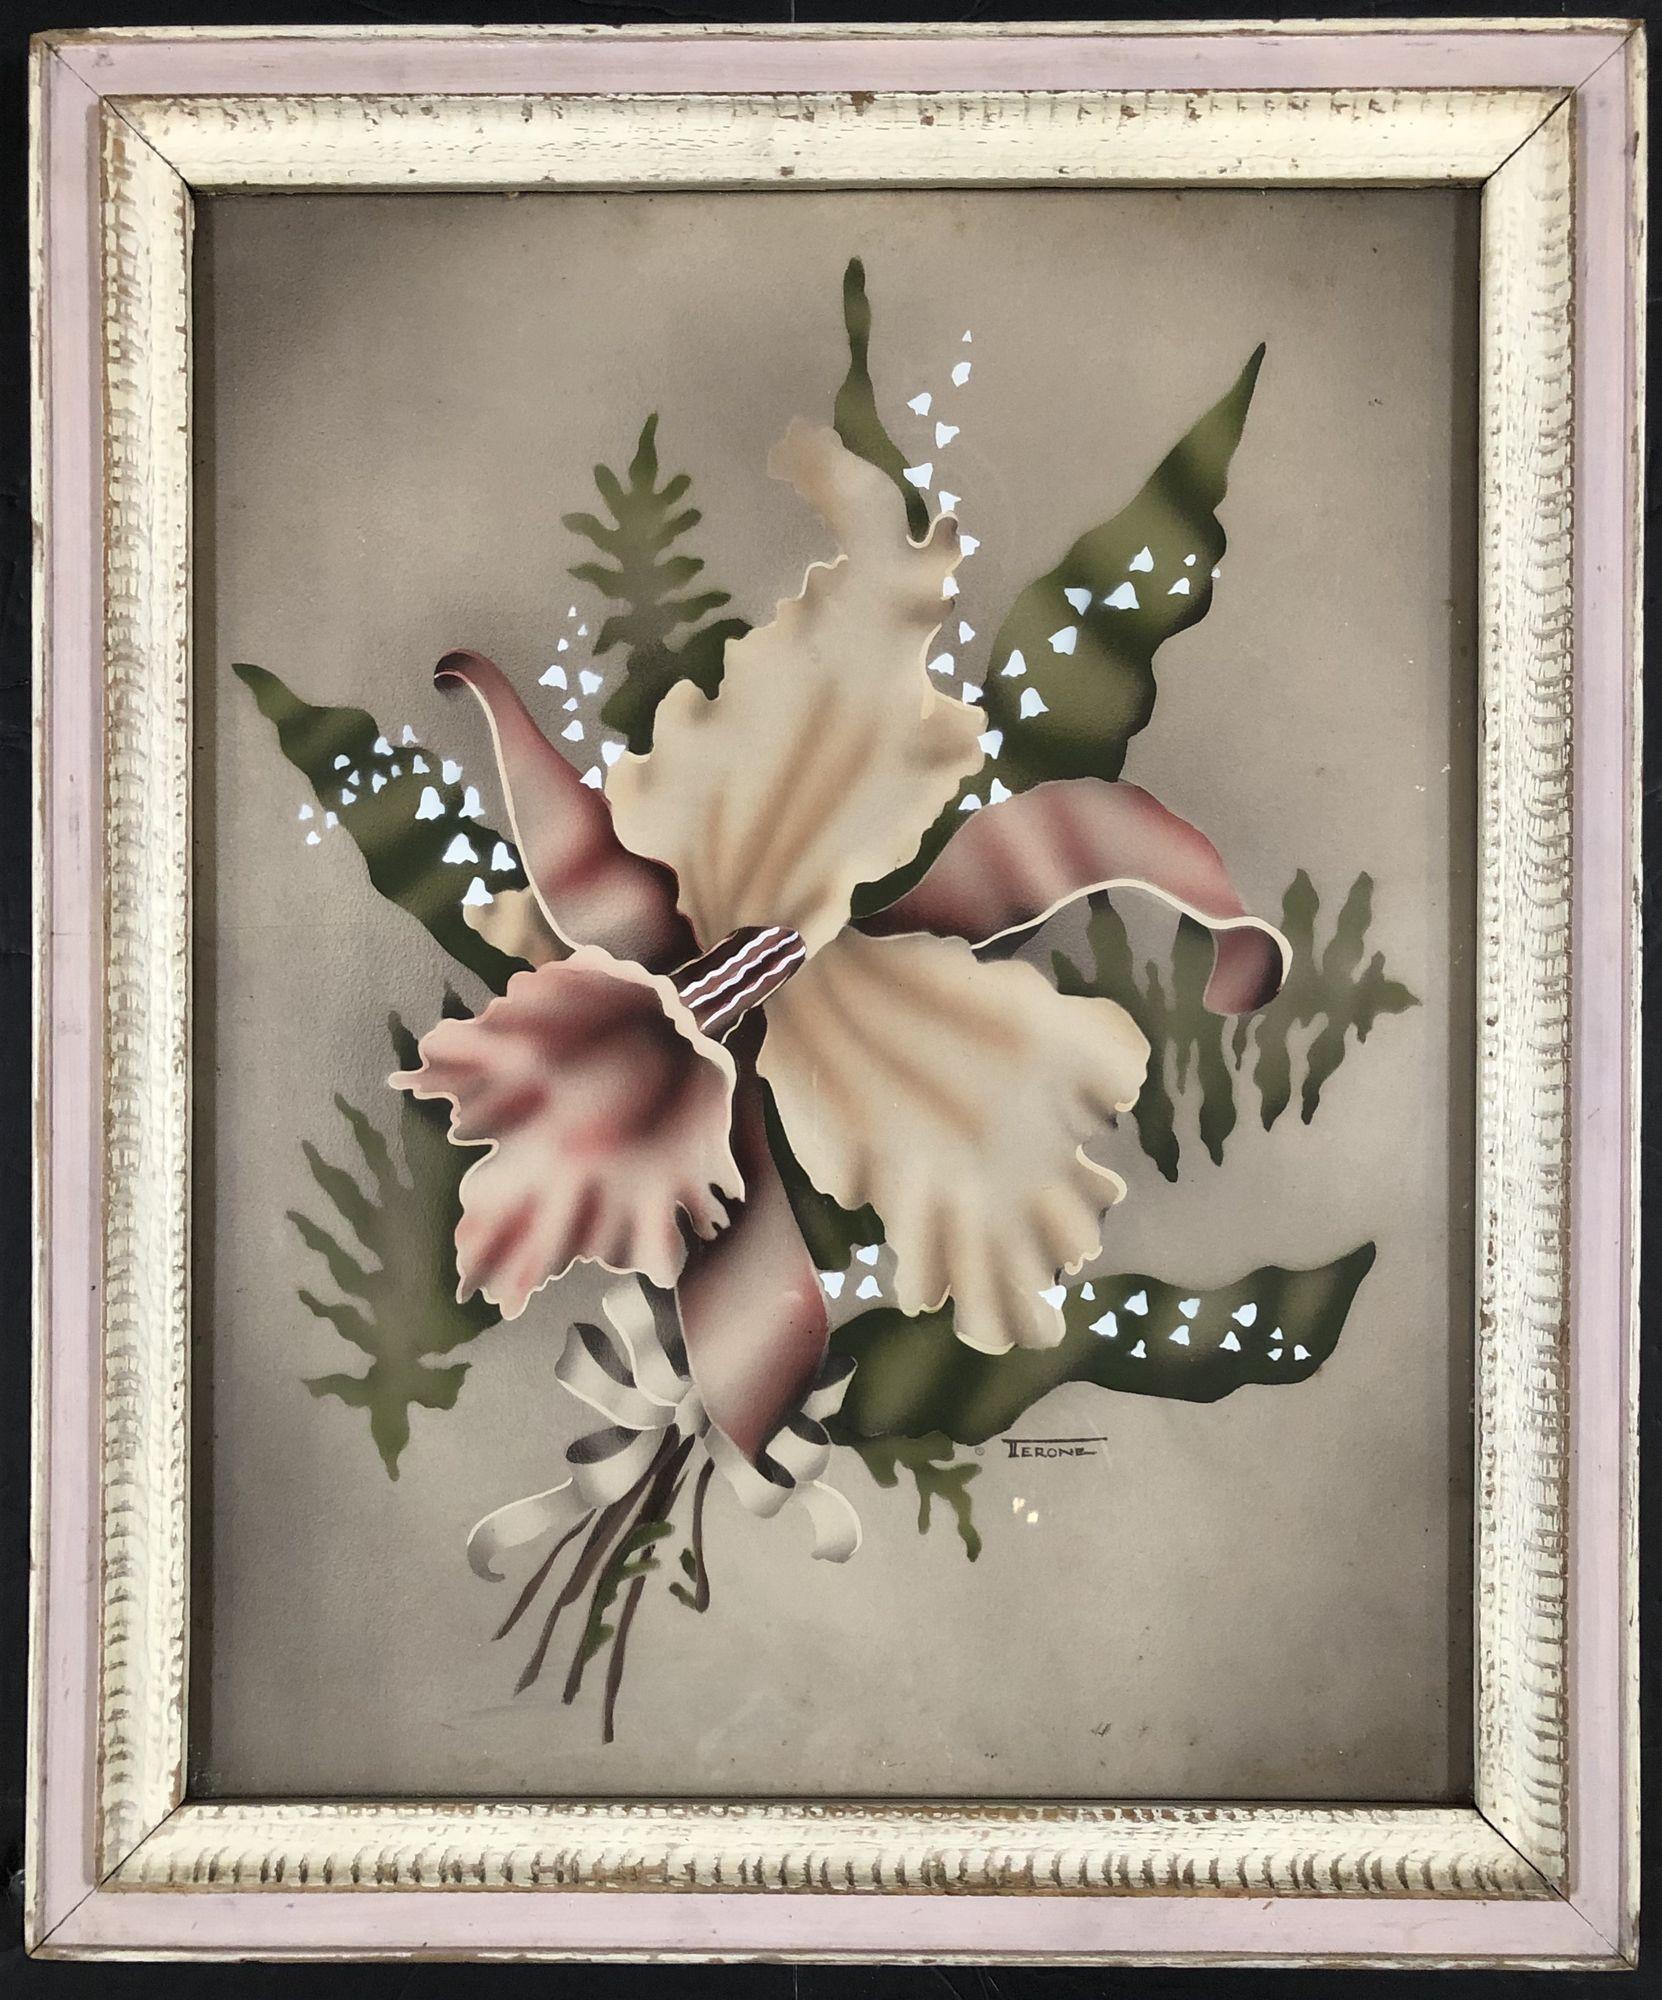 Mid-20th Century Airbrushed Daffodil Flowers with Bow Mid Century Art Signed by Terone For Sale